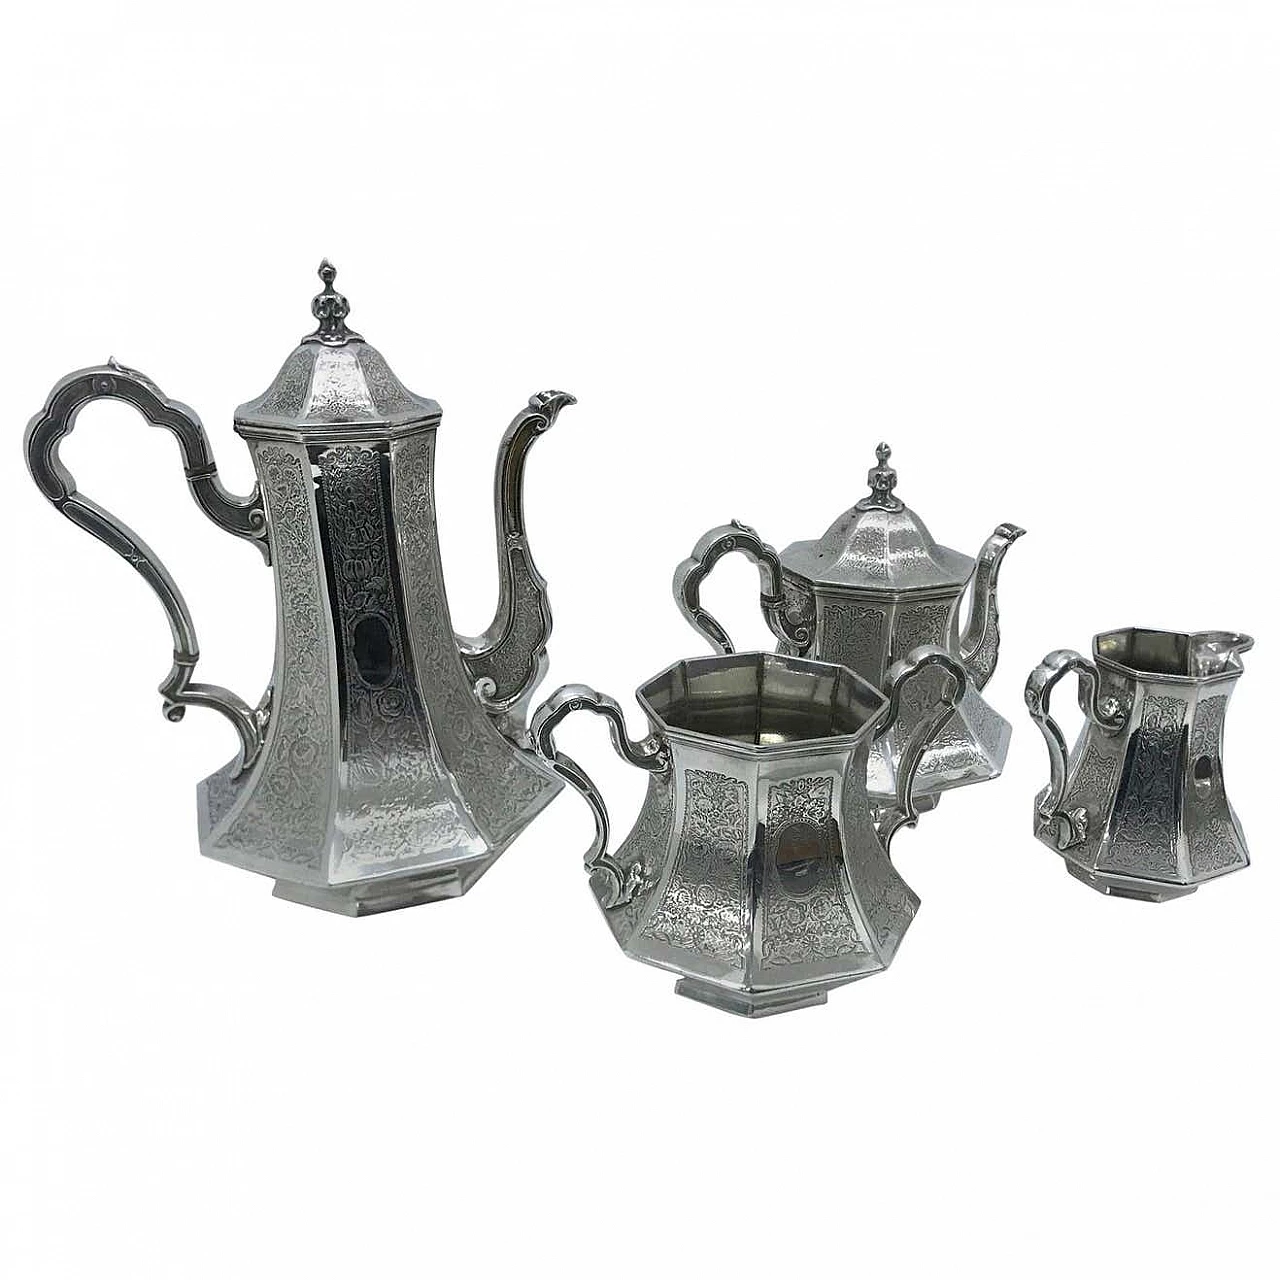 Art Nouveau tea service in engraved silver plated by Skinner & Co, 19th century 1344357